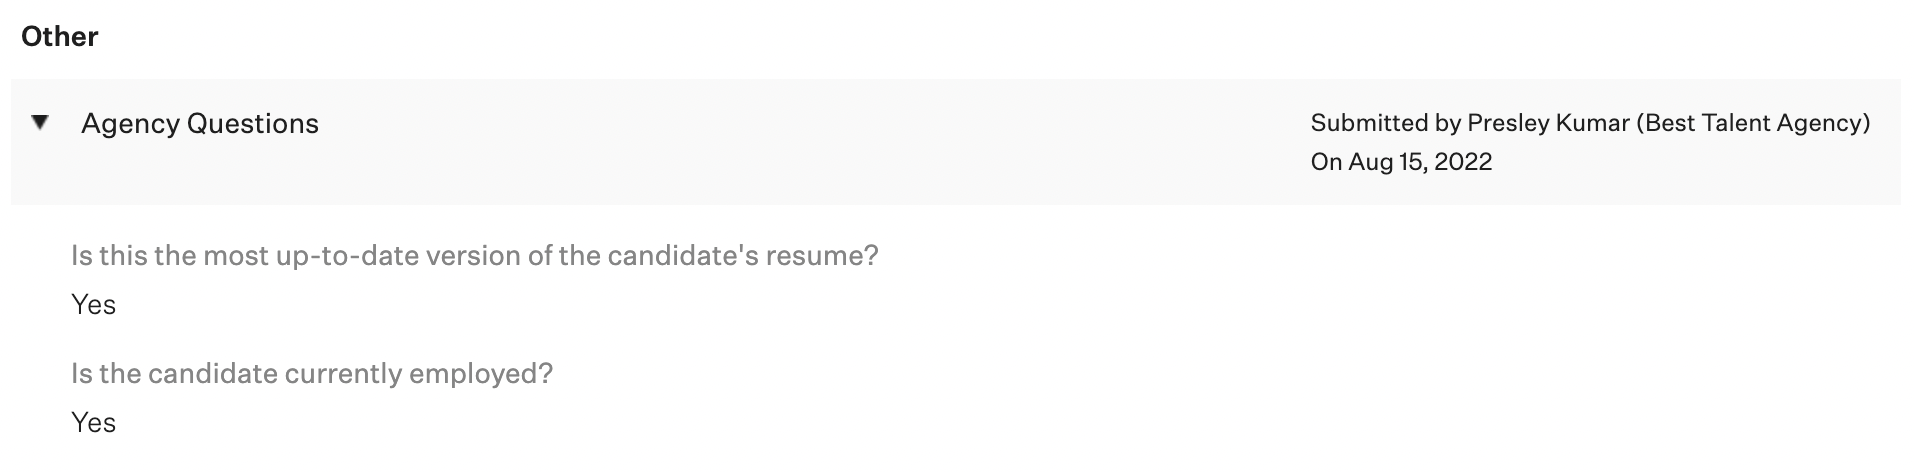 Screenshot-of-the-agency-questions-section-of-a-candidate-profile.png